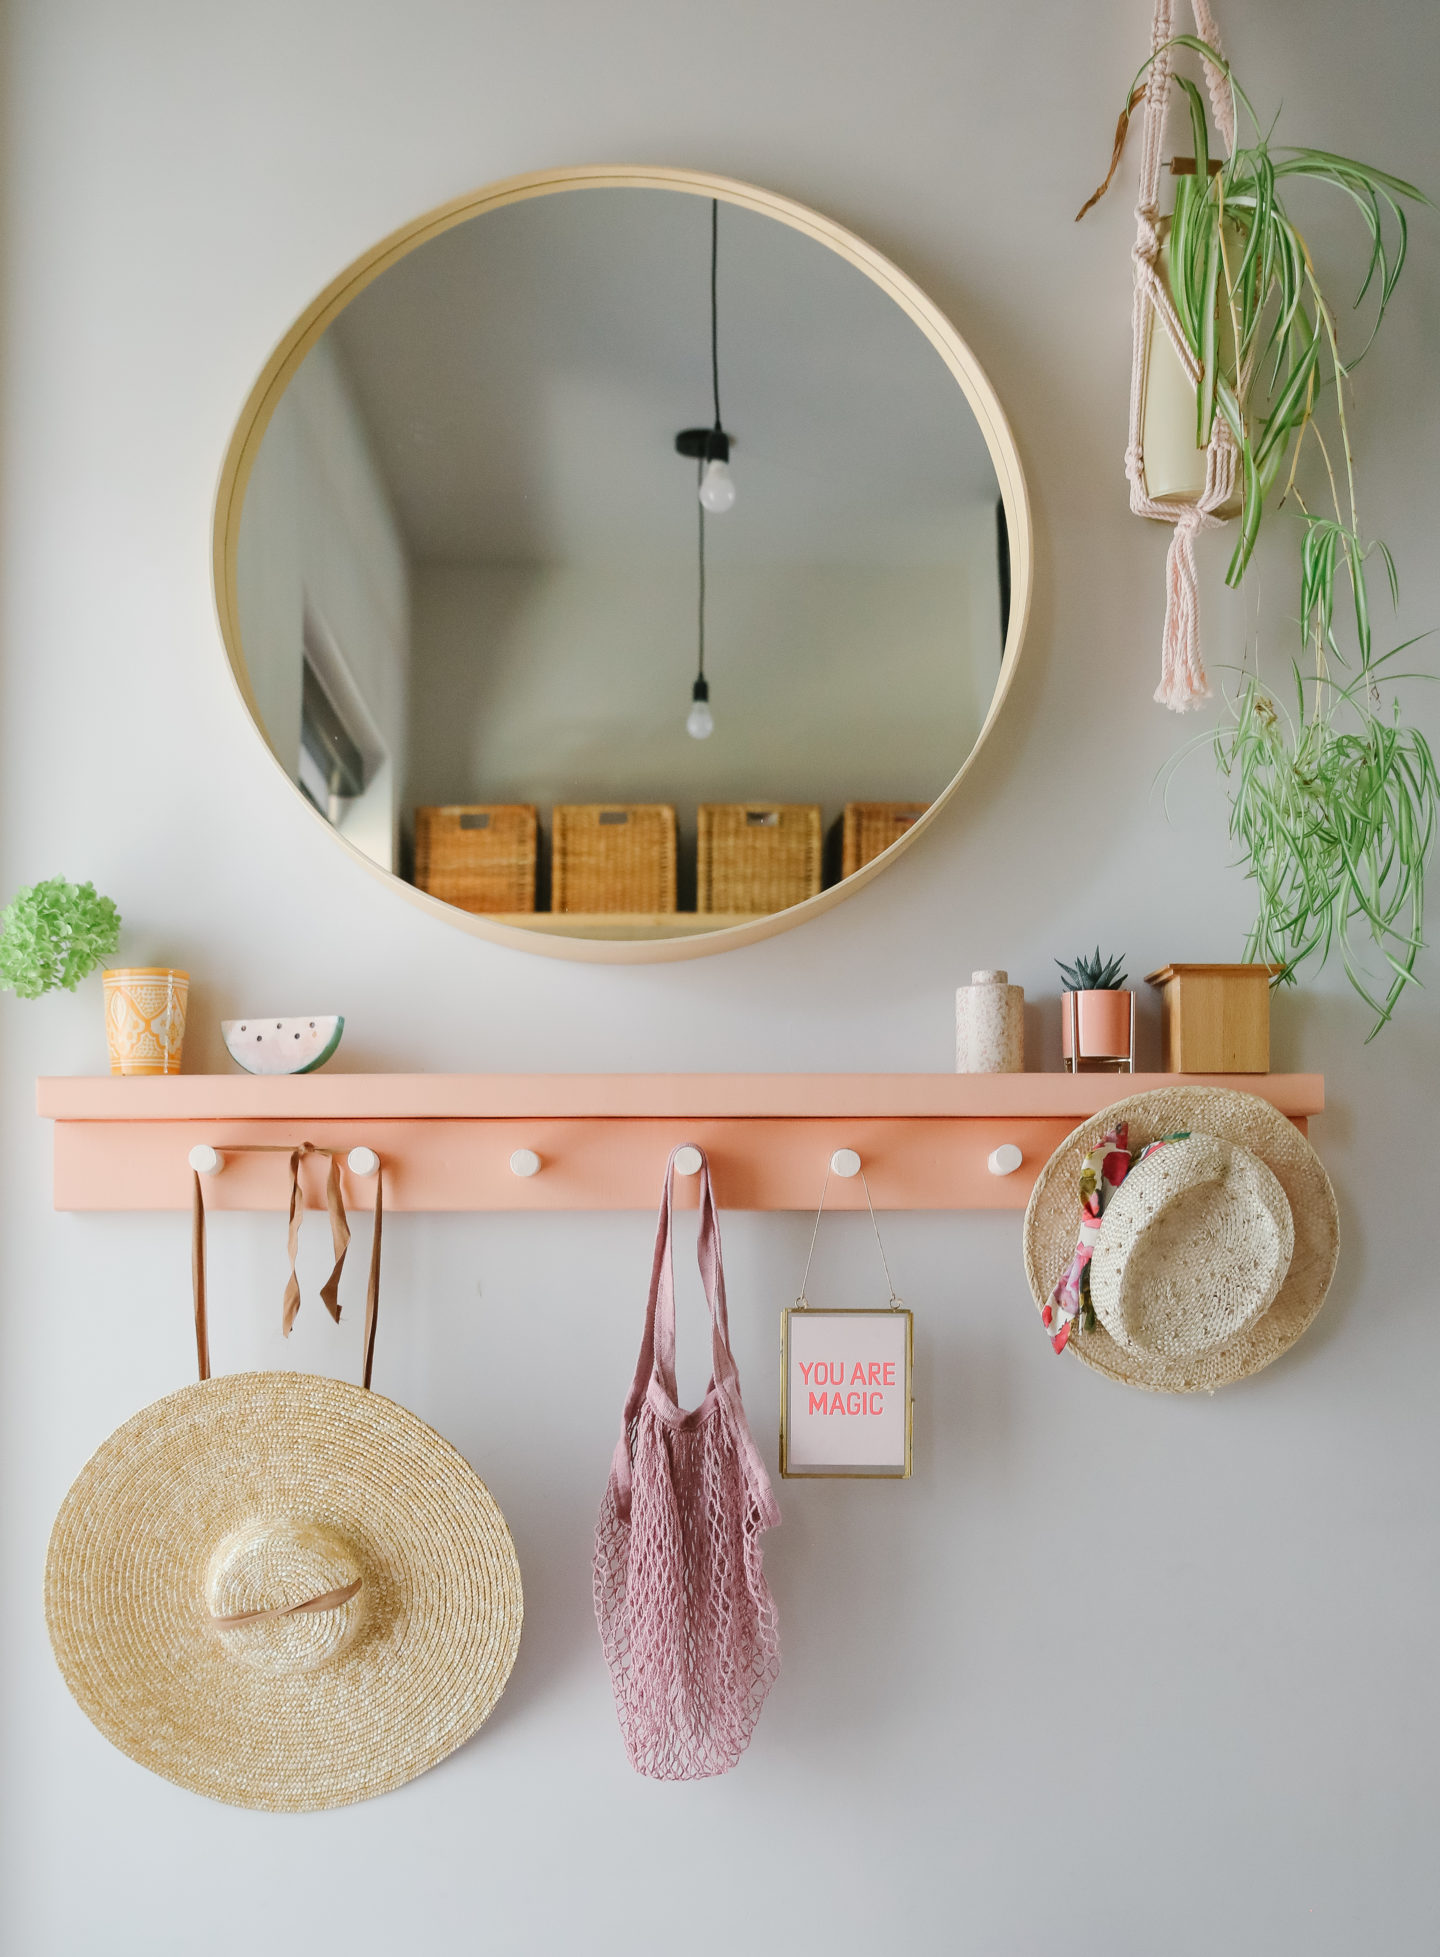 Style an entryway under $50